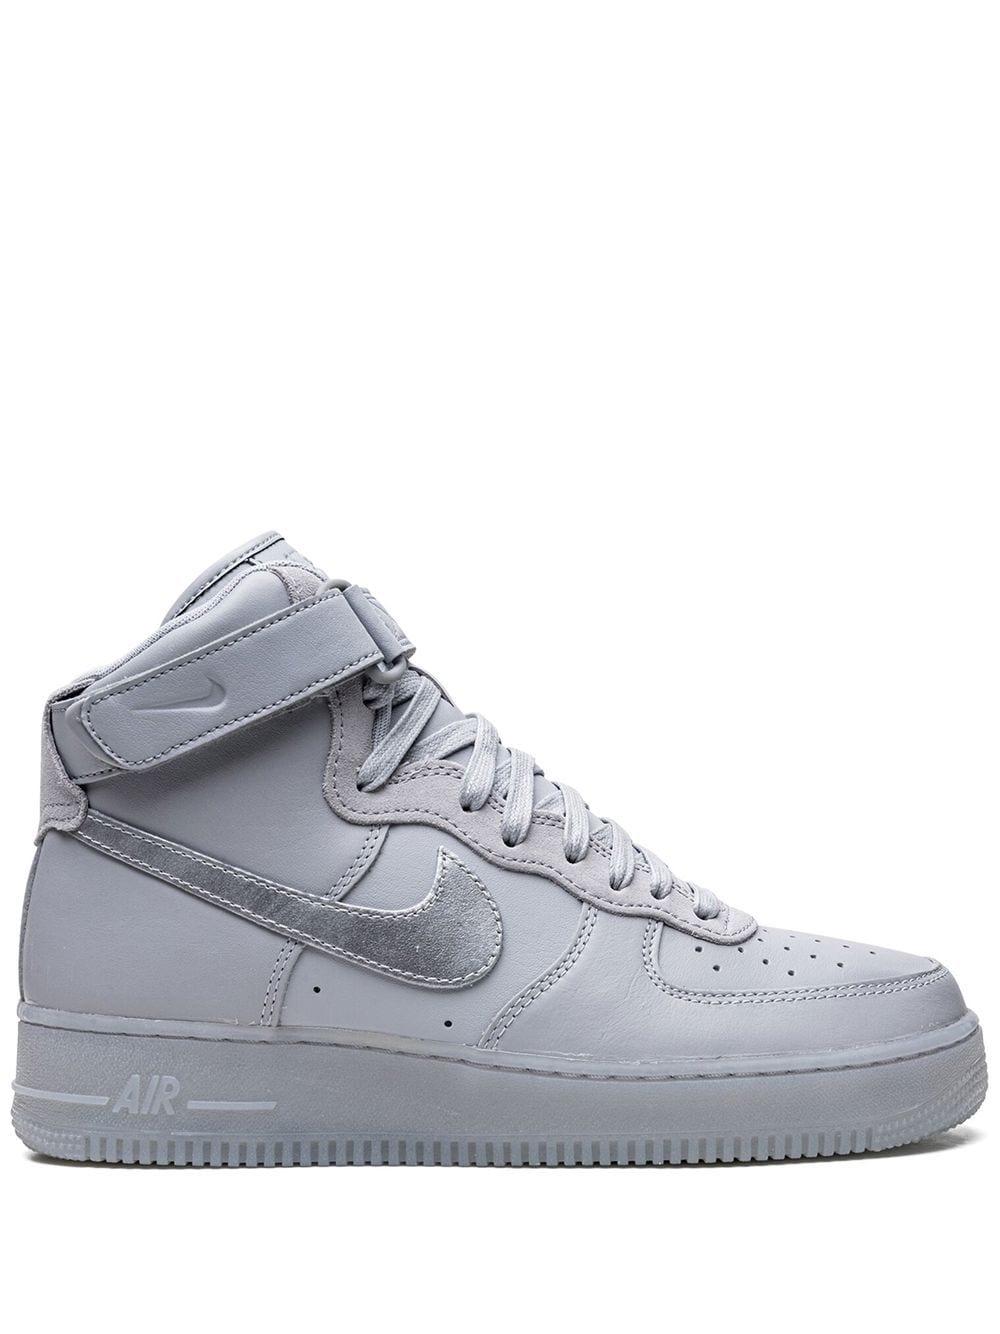 Nike Air Force 1 High grey Volt Sneakers in Gray for Men